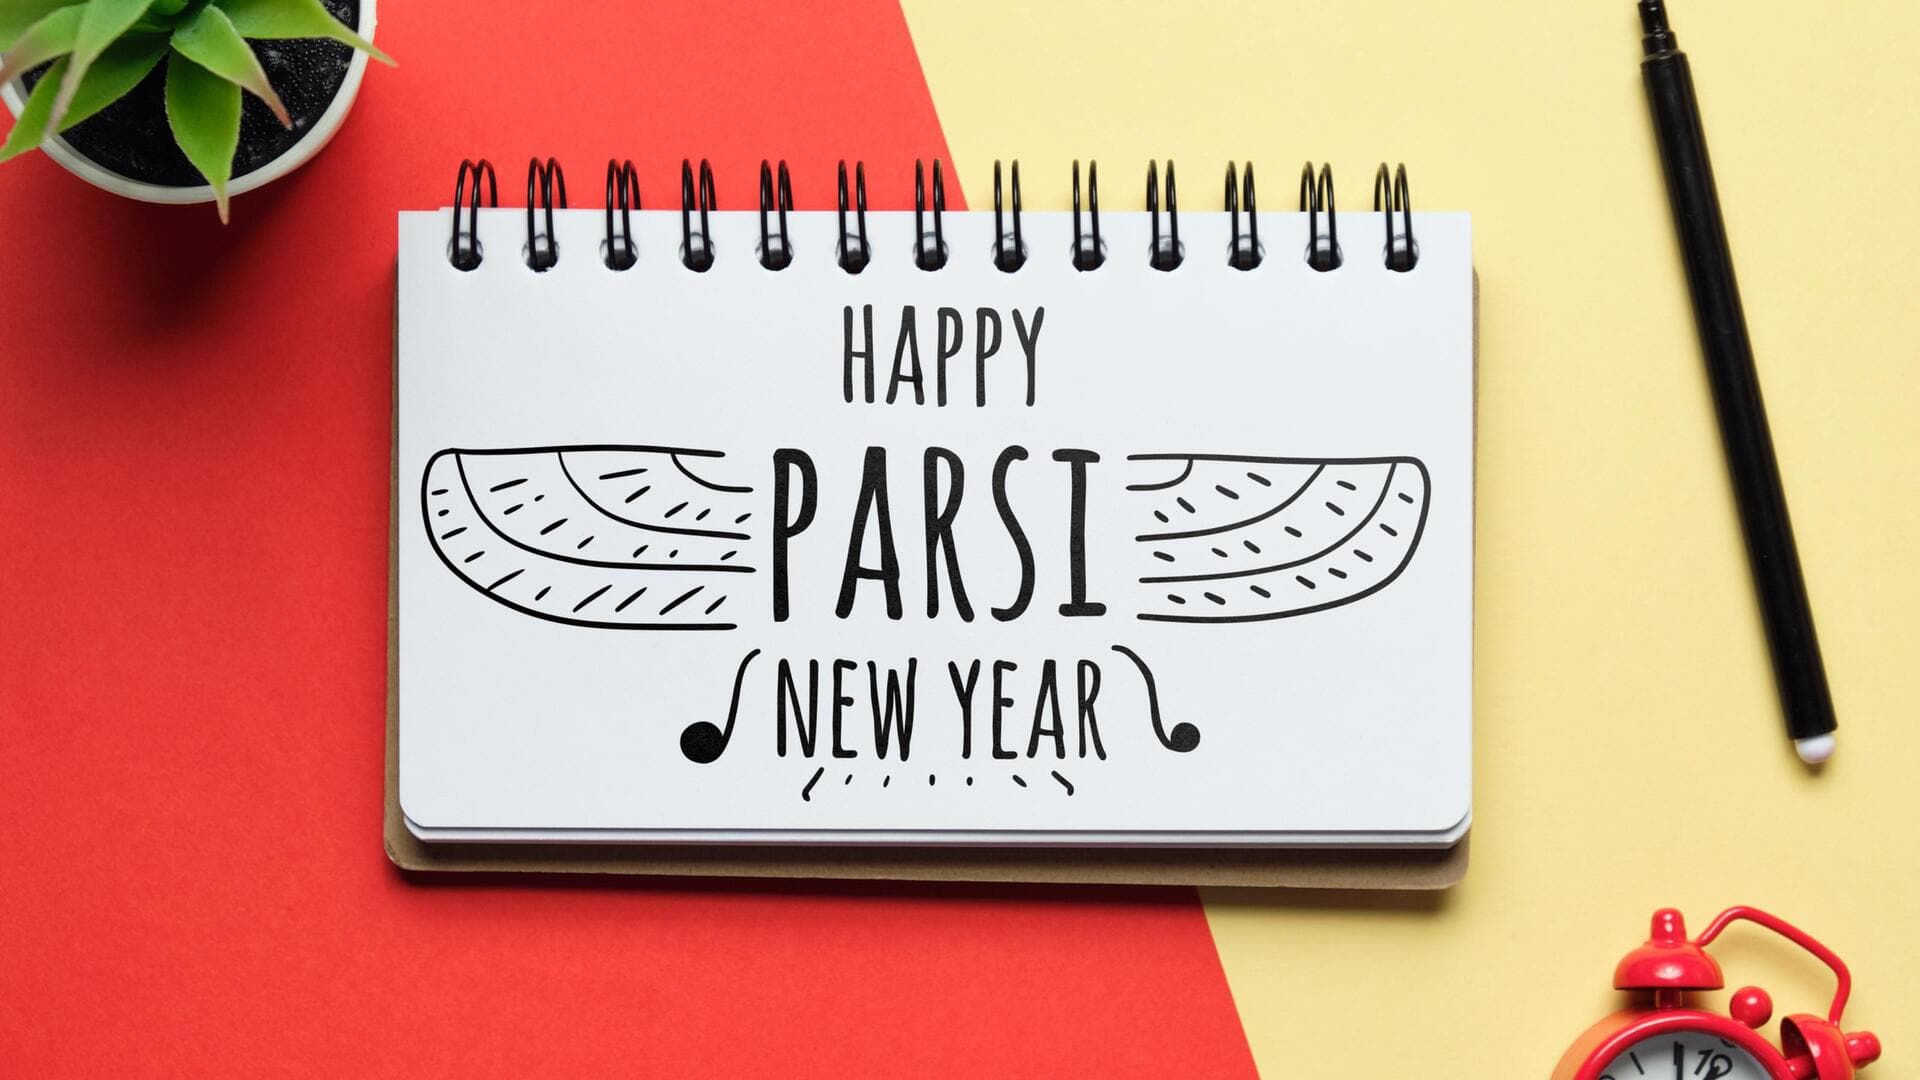 Parsi New Year 2023: Why it's celebrated twice a year